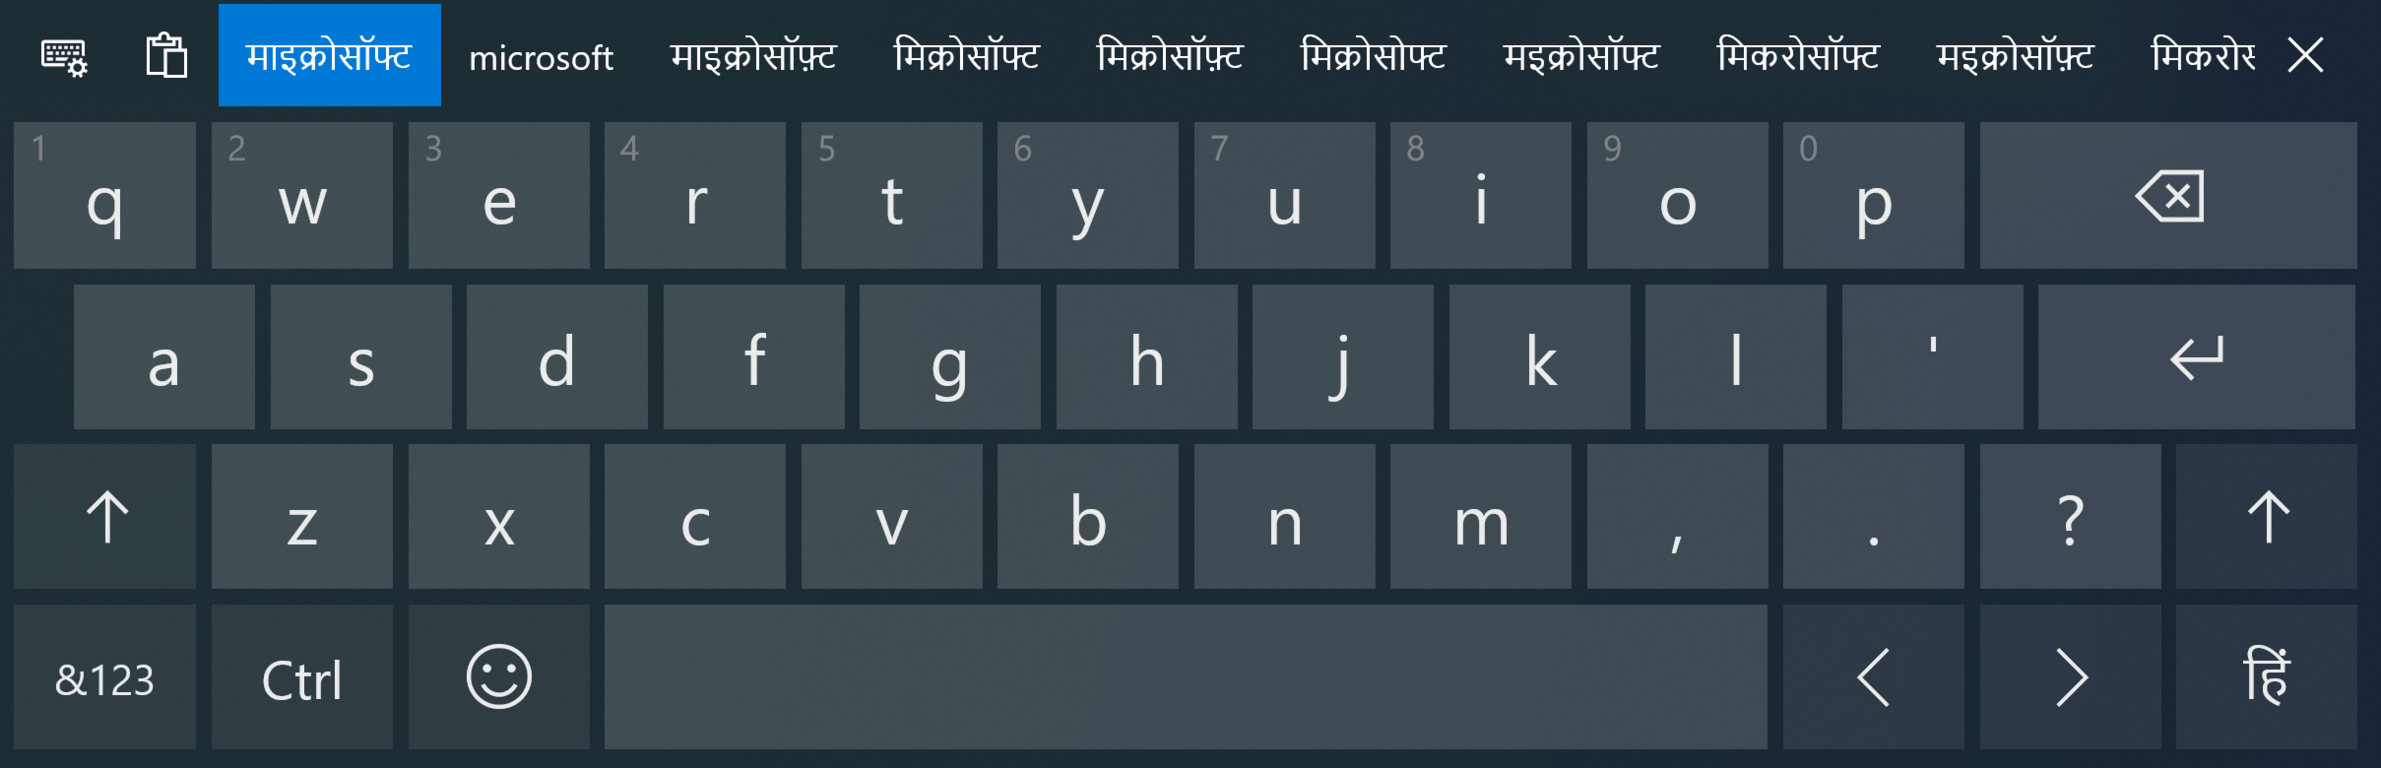 Microsoft Integrates Smart Phonetic Indic Keyboards For 10 Indian Languages In Windows 10 Onmsft Com